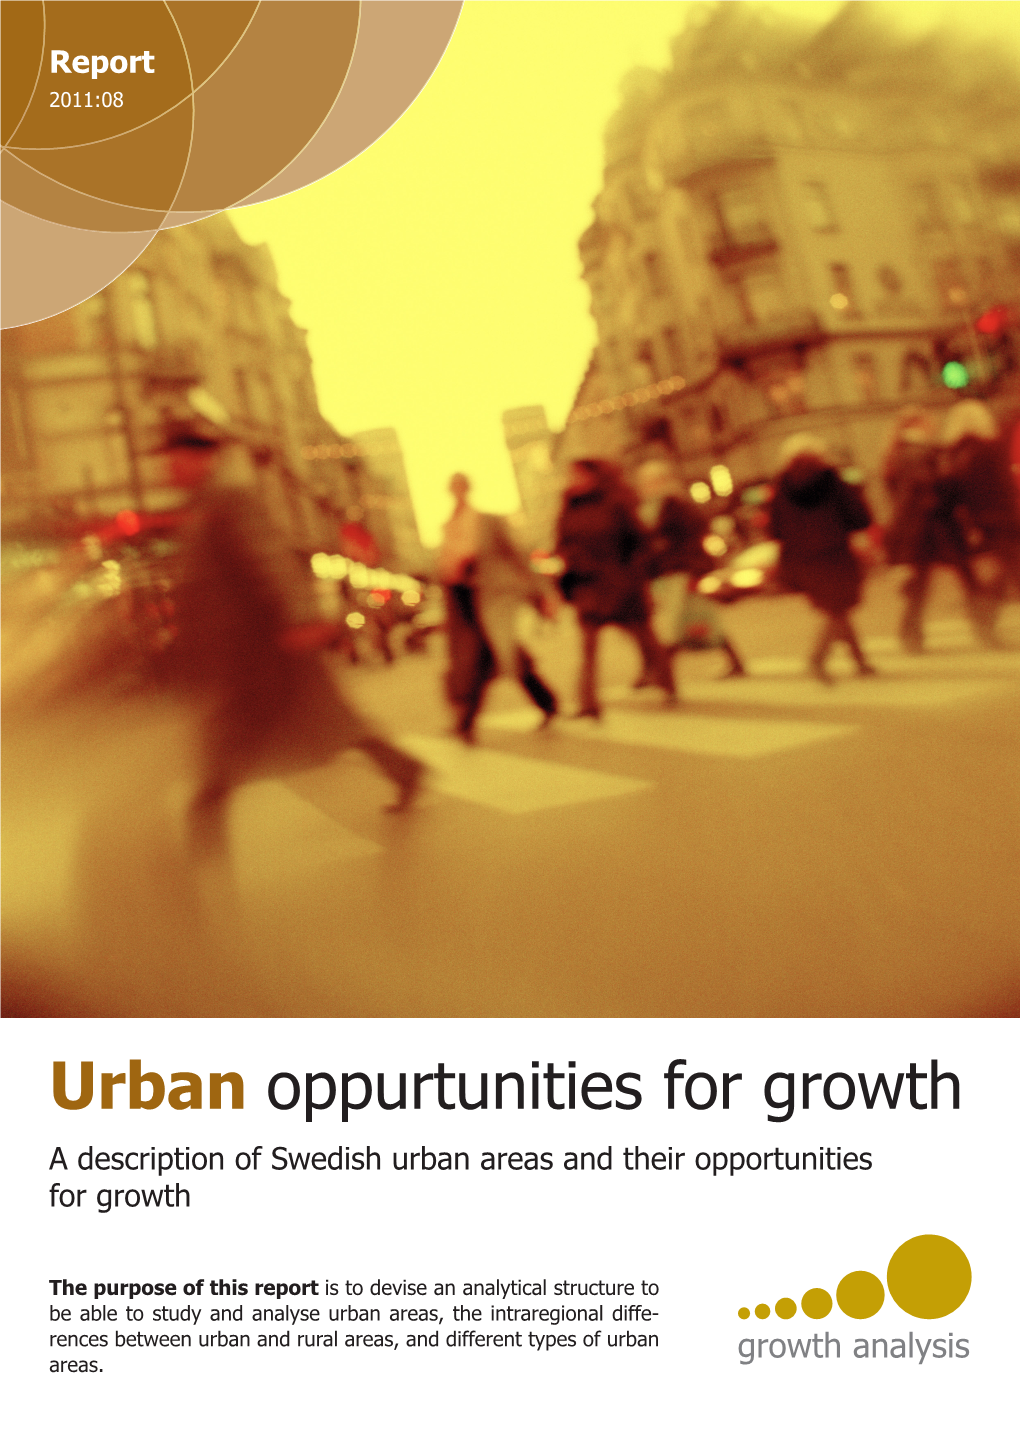 Urban Oppurtunities for Growth a Description of Swedish Urban Areas and Their Opportunities for Growth